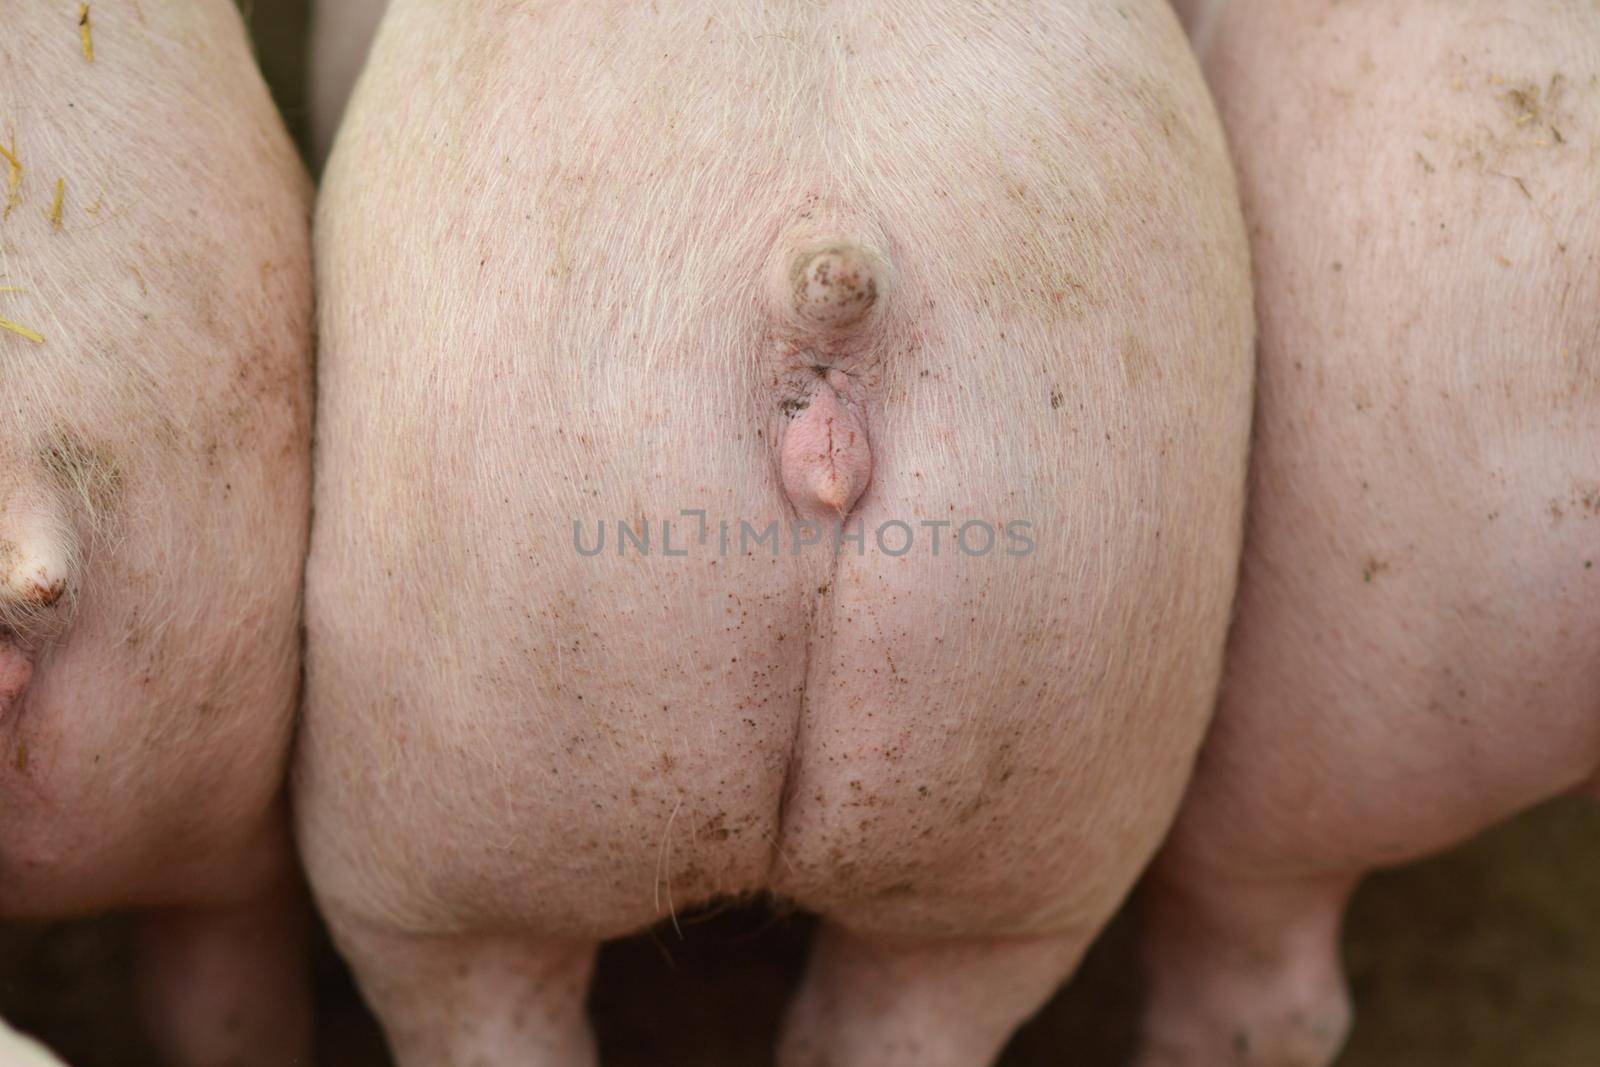 big pigs. rear view. naked pig butt. close-up